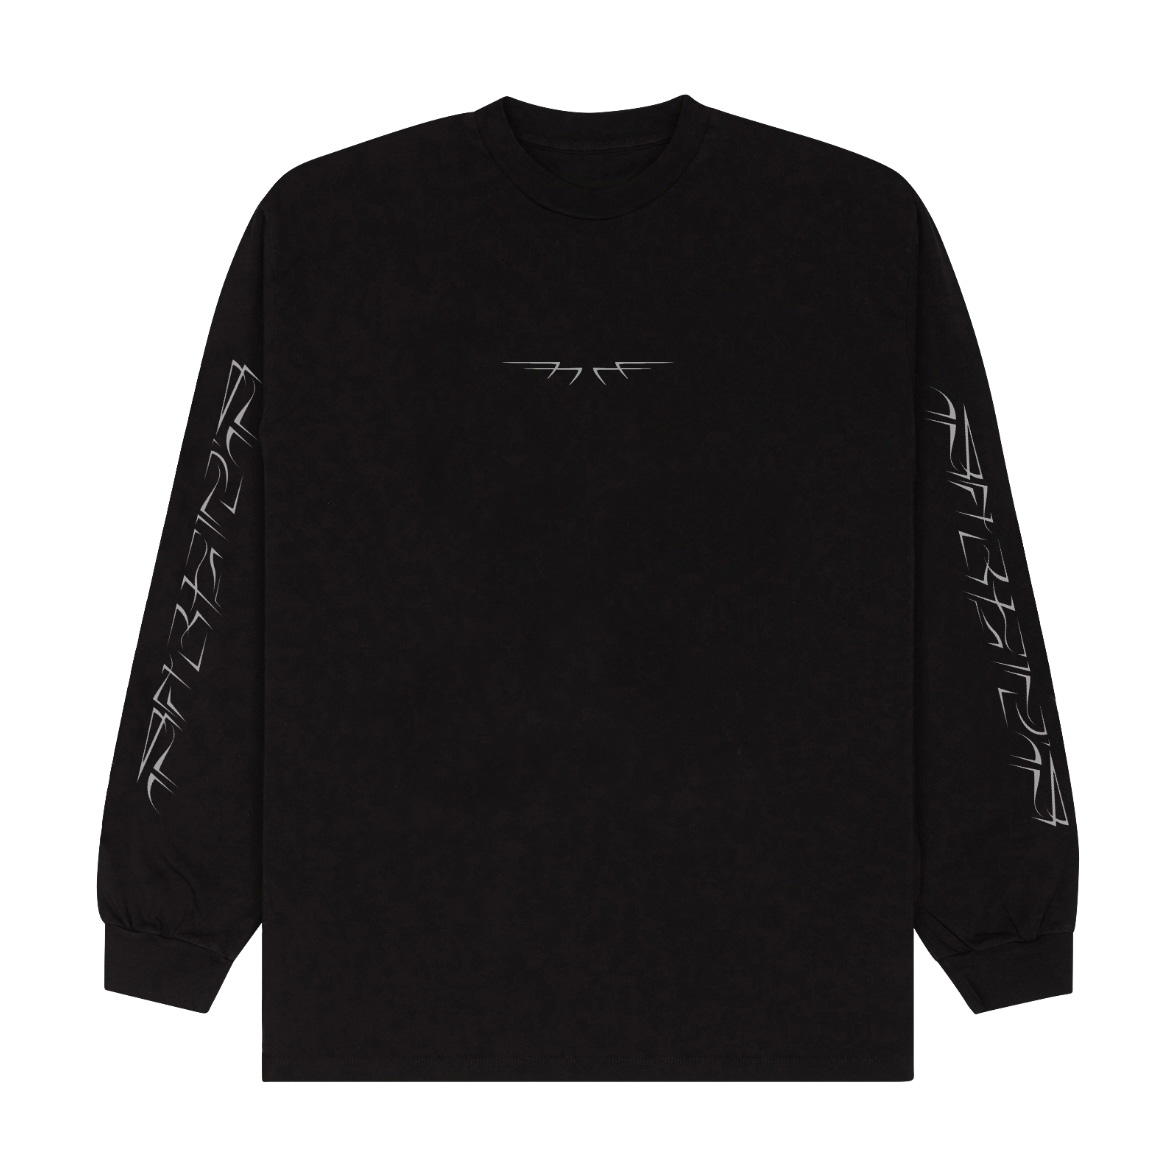 Limited Edition SIRENS Longsleeve - FRONT